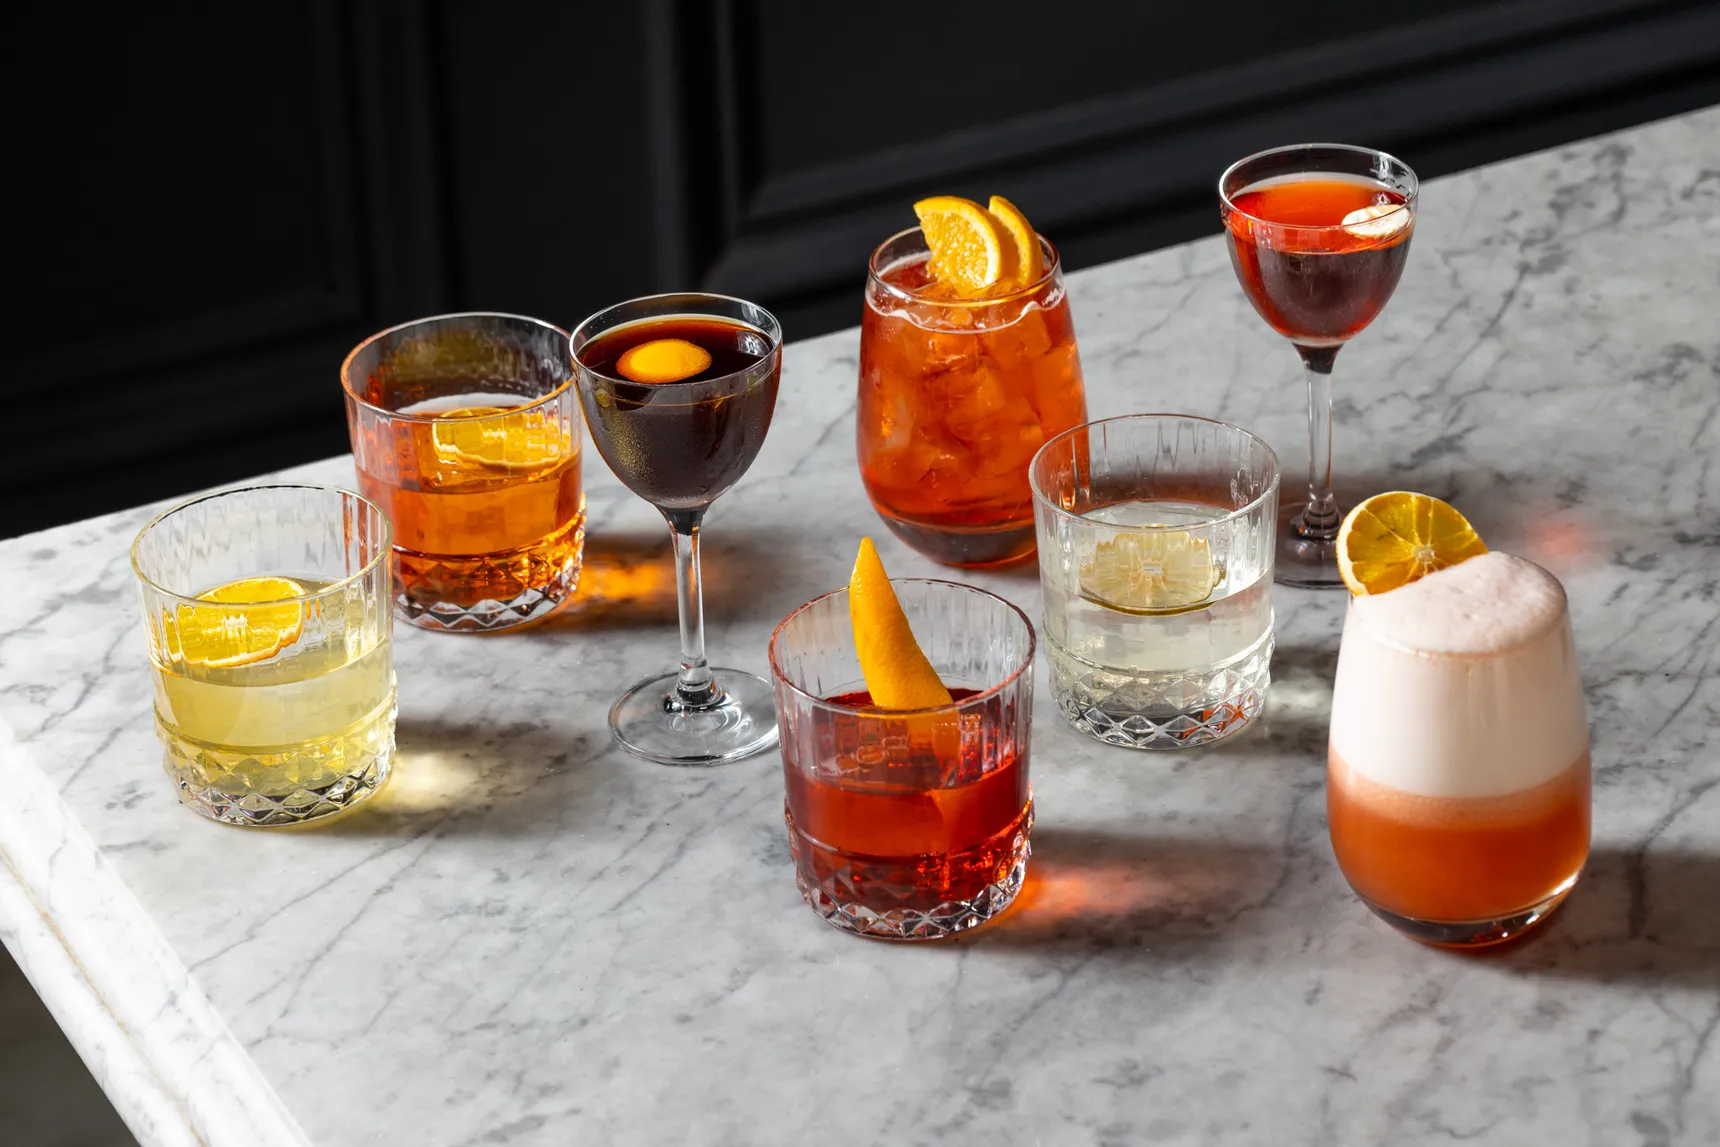 What to do in LA this month | Negroni based cocktails served at Negroni Bistro & Bar on West 3rd Street